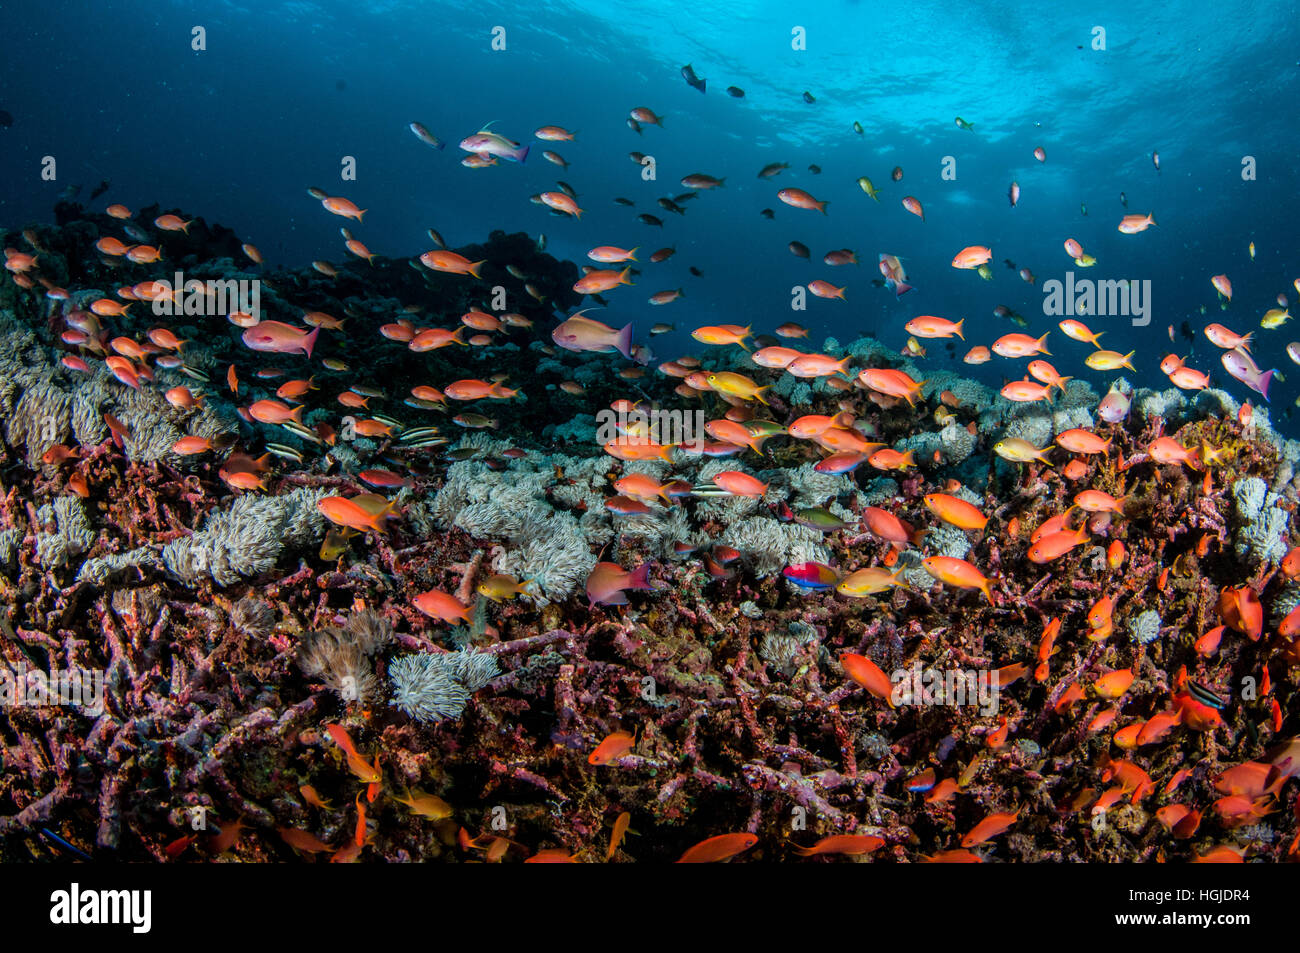 Wideangle coral reef view, Bali, Indonesia Stock Photo